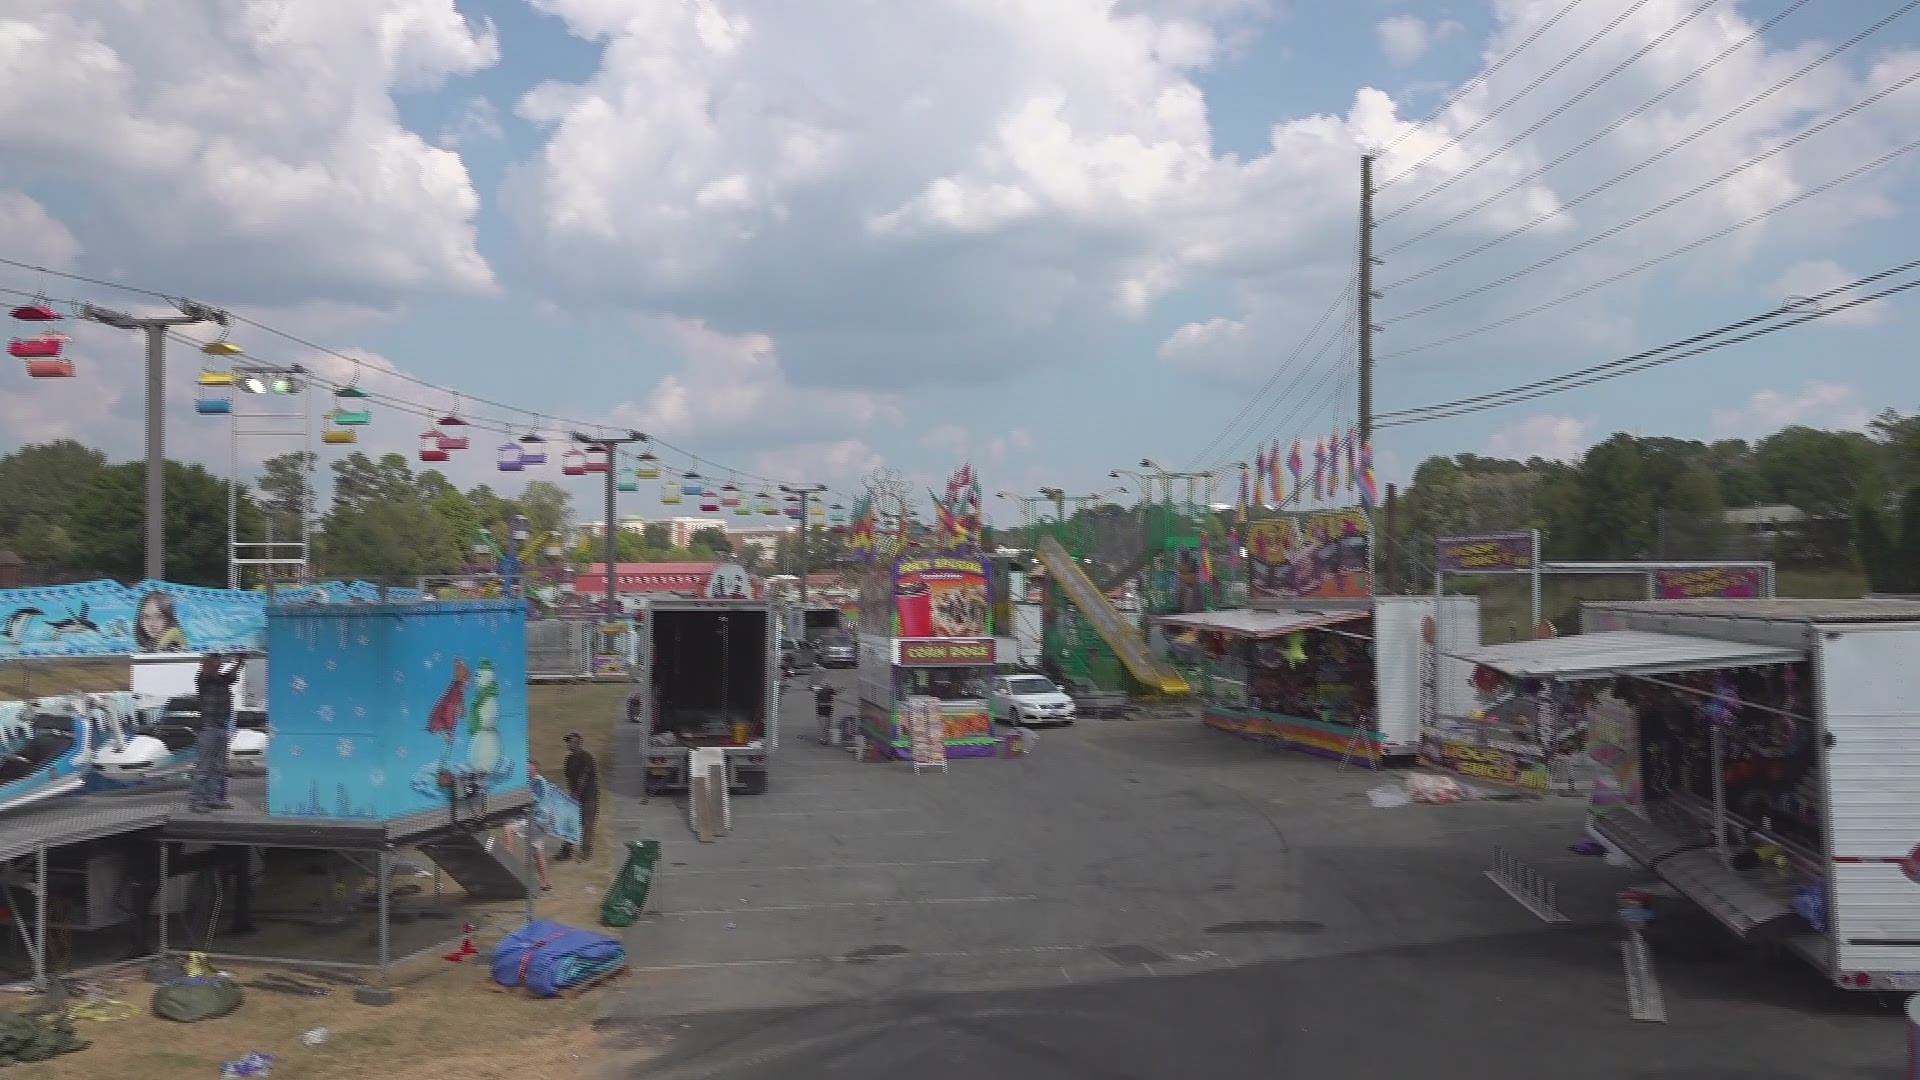 It’s a major milestone for the annual fair in Cumming, and the mayor says it’s changed significantly through the years.